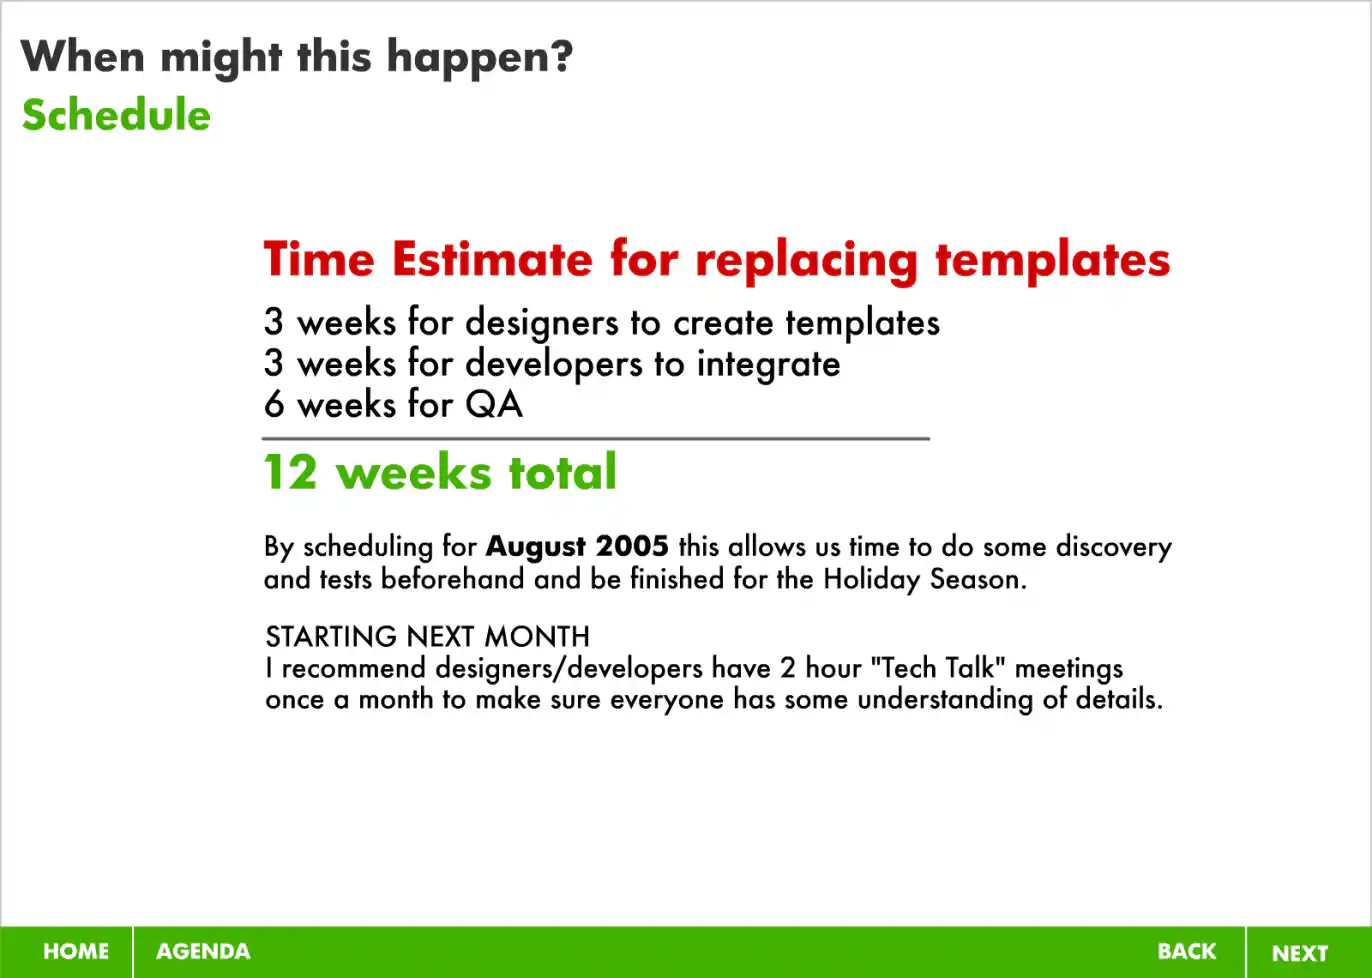 Slide 26: Schedule Showing Time Estimates for Replacing Templates and Begining Tech Talks To Educate Others